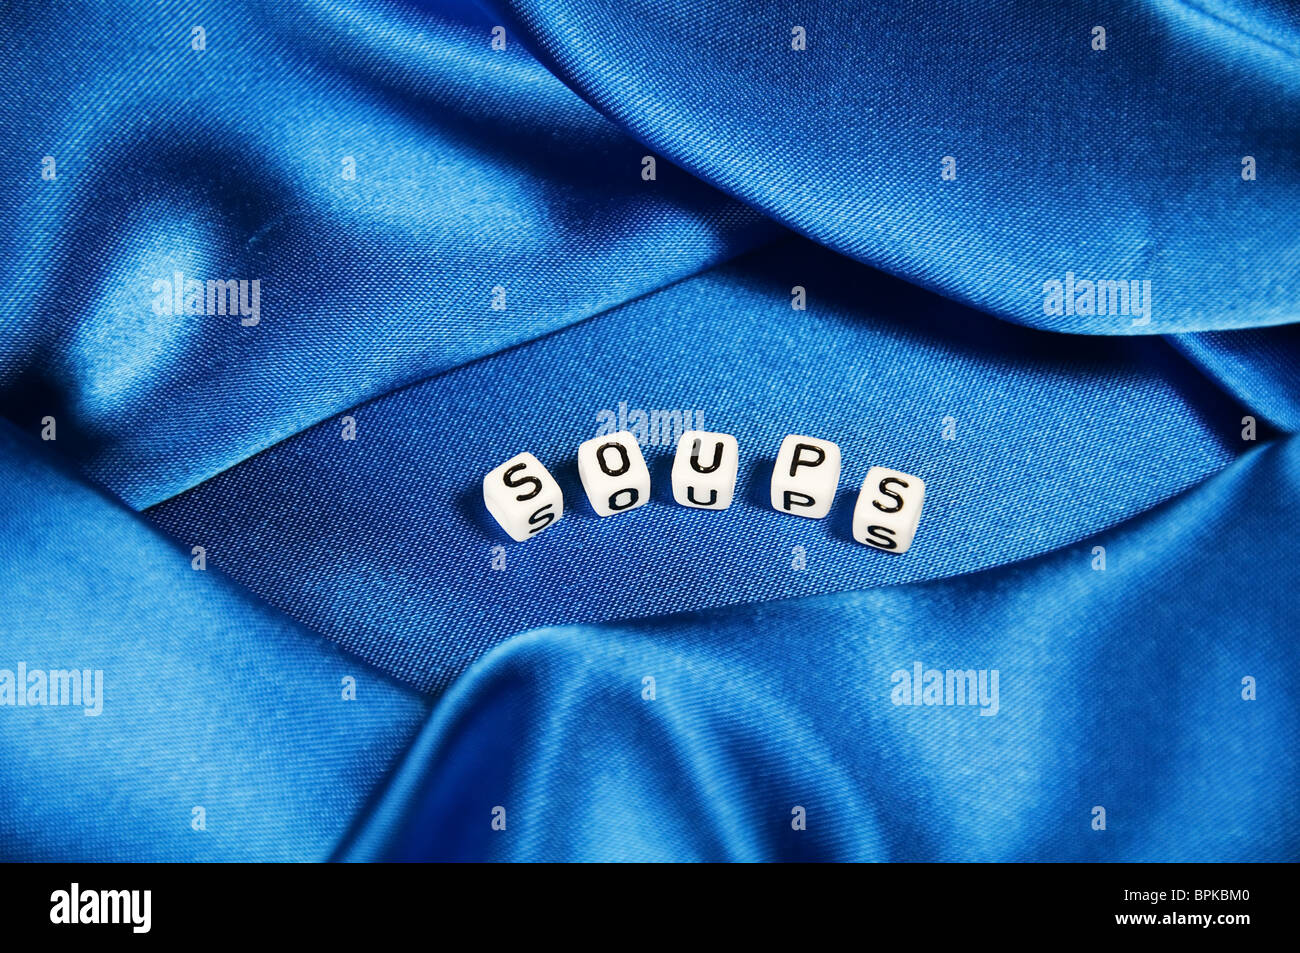 Royal blue satin background with rich folds and wrinkles for texture is the word Soups in black and white cube lettering series. Stock Photo